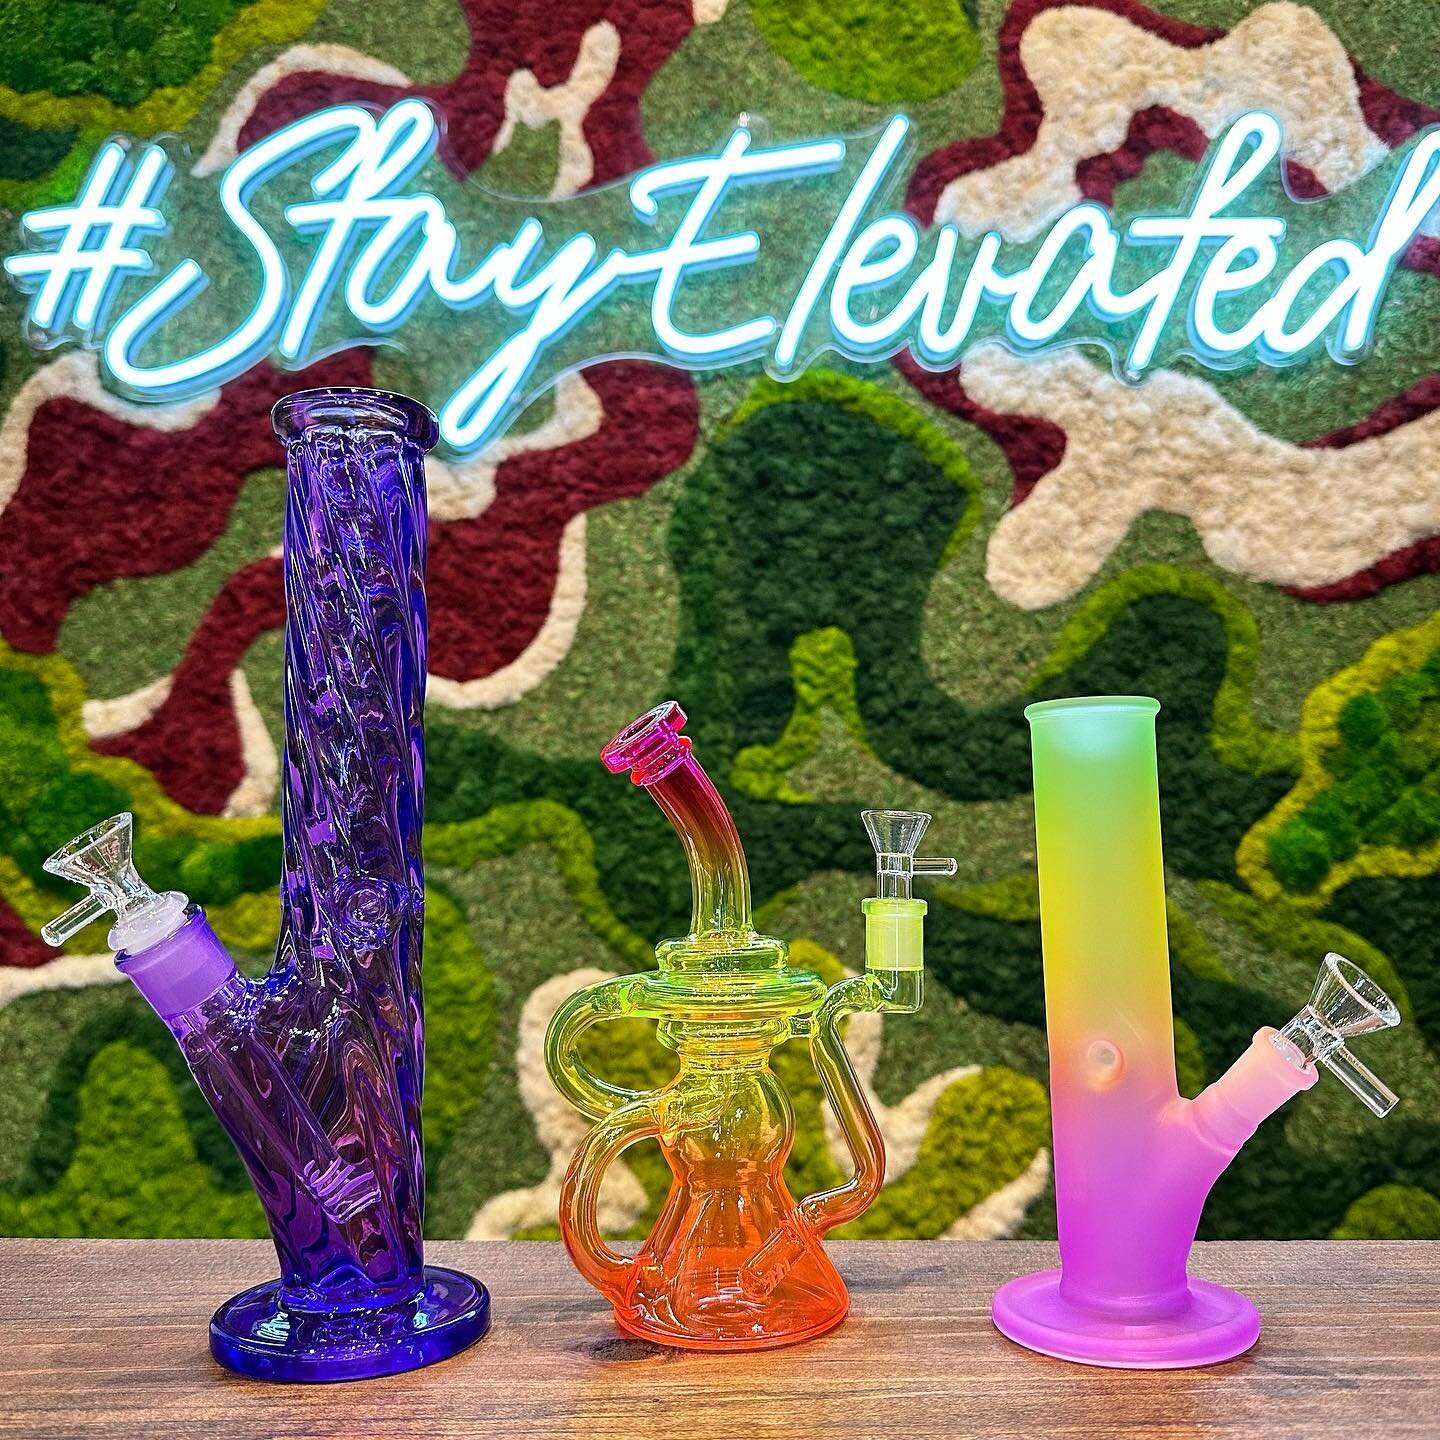 Colorful glass for any type of grass! 🌱💨

#StayElevated #Aggieland #CollegeStation #Aggie #CStat #TexasAM #Aggies #CollegeStationTX #BCS #TAMU #TexasAMFootball #AggieBound #AggiePride #GigEm #Howdy #VeteranOwned #Aggieville #BrazosValley #BryanTX #